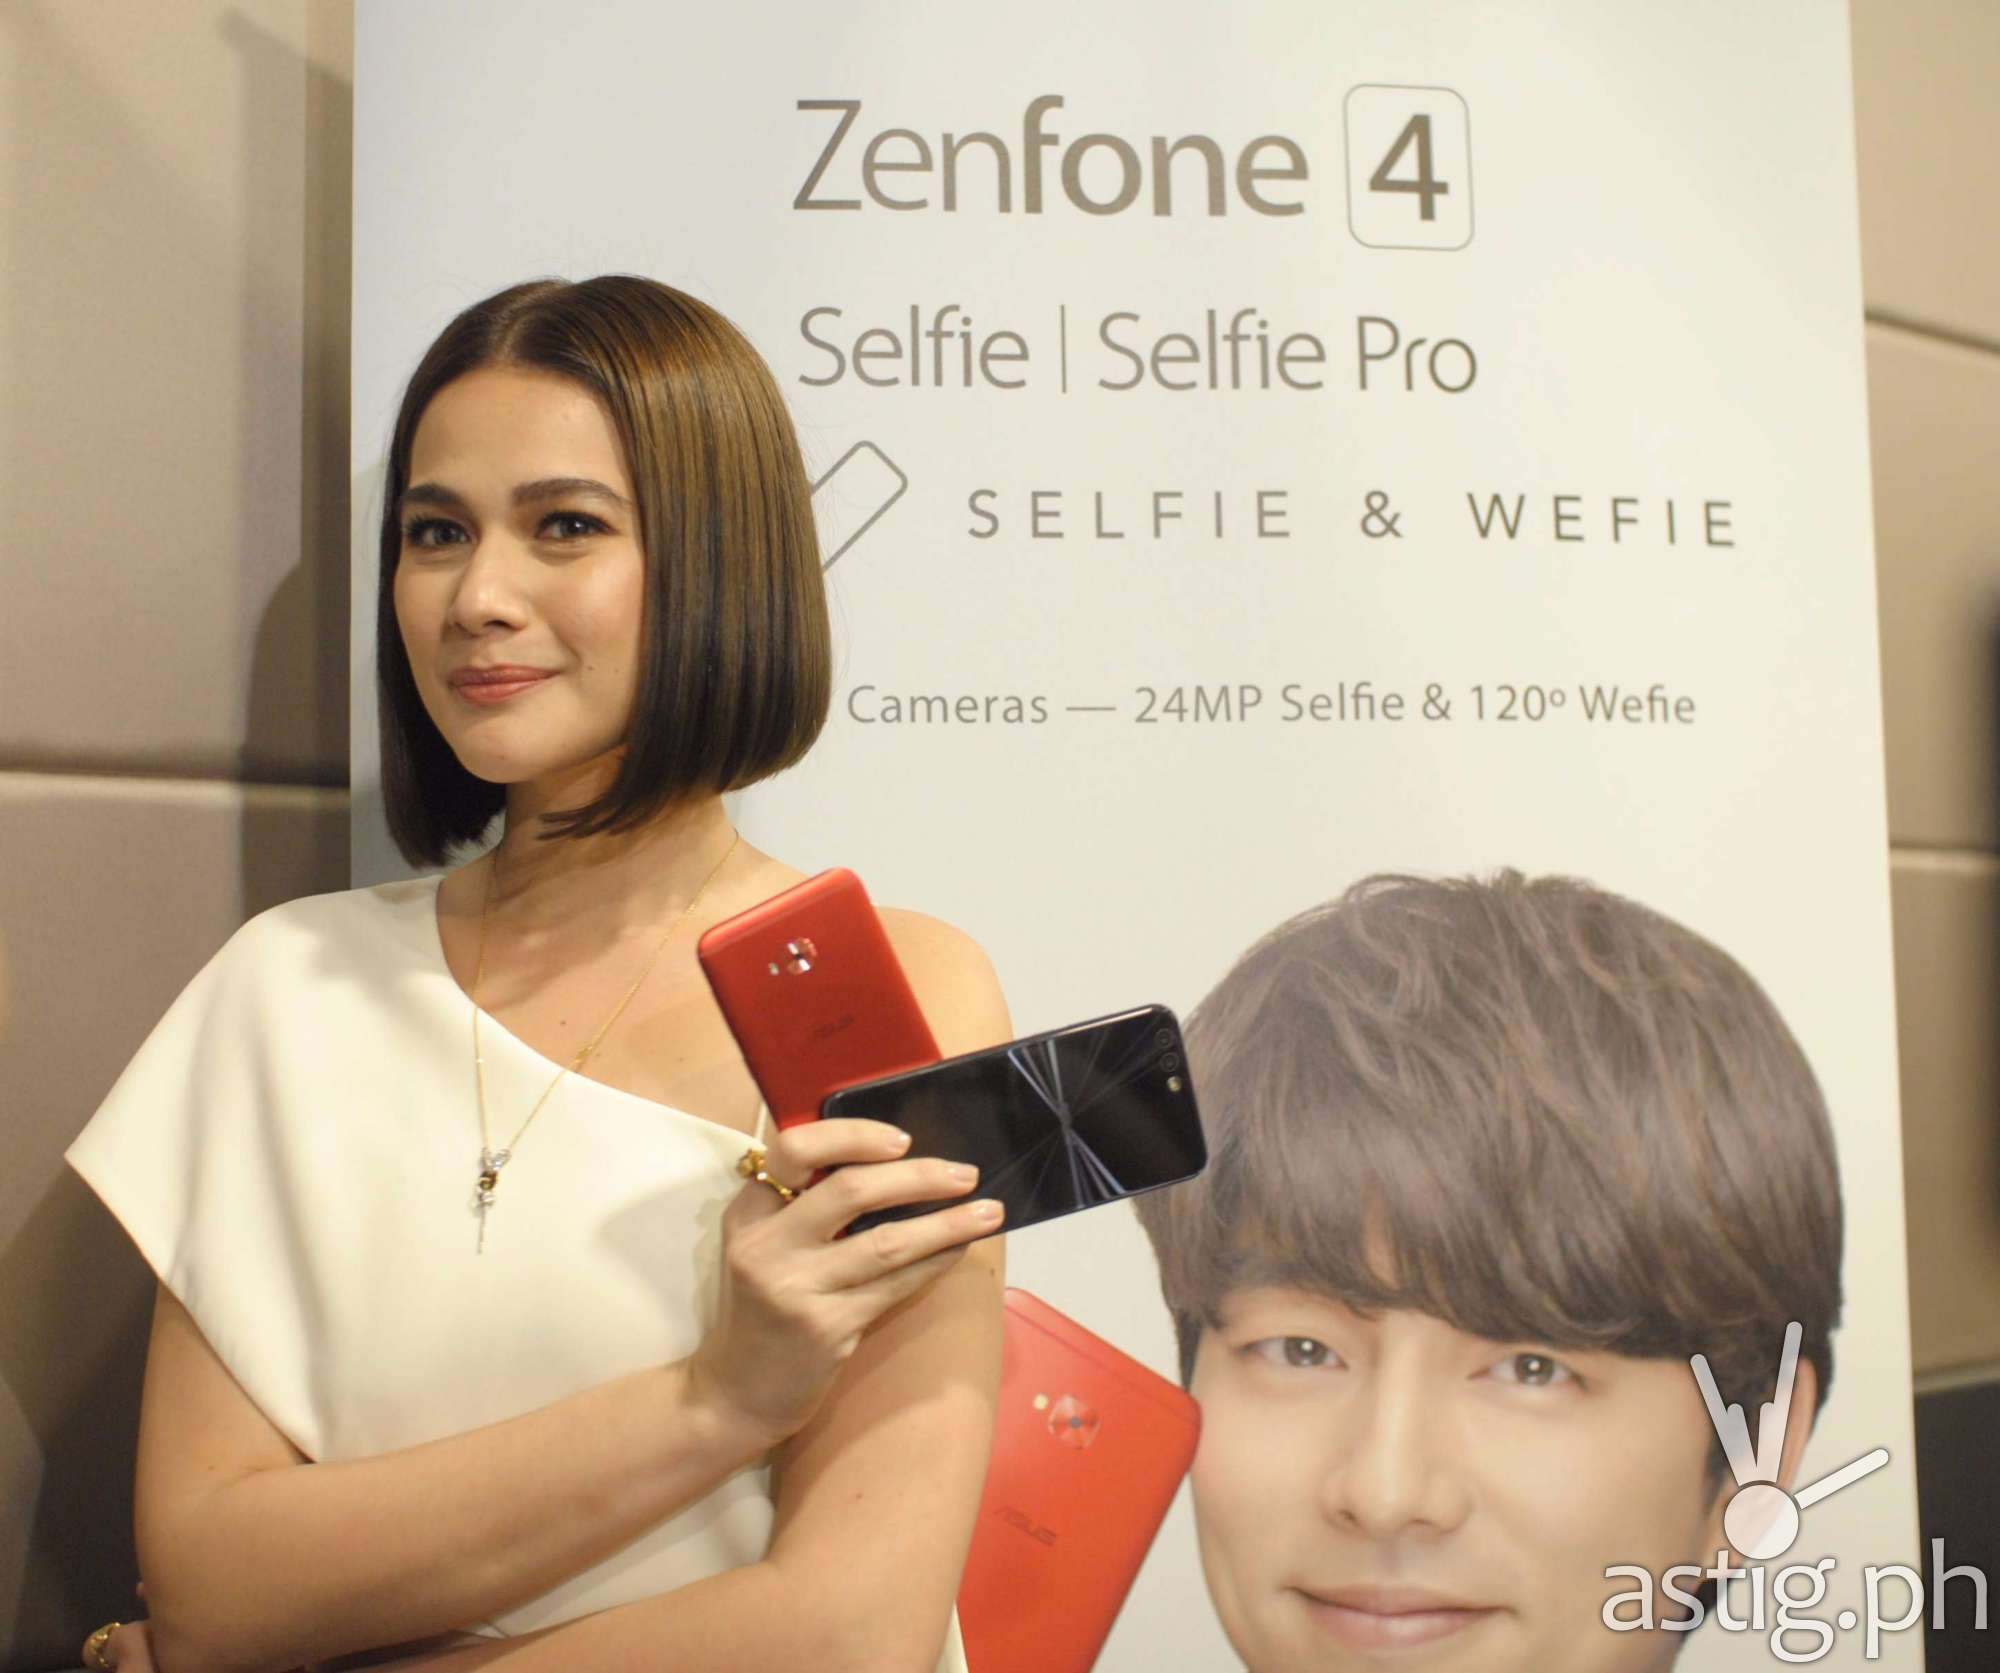 Bea Alonzo and Gong Yoo are ASUS' newest brand ambassadors